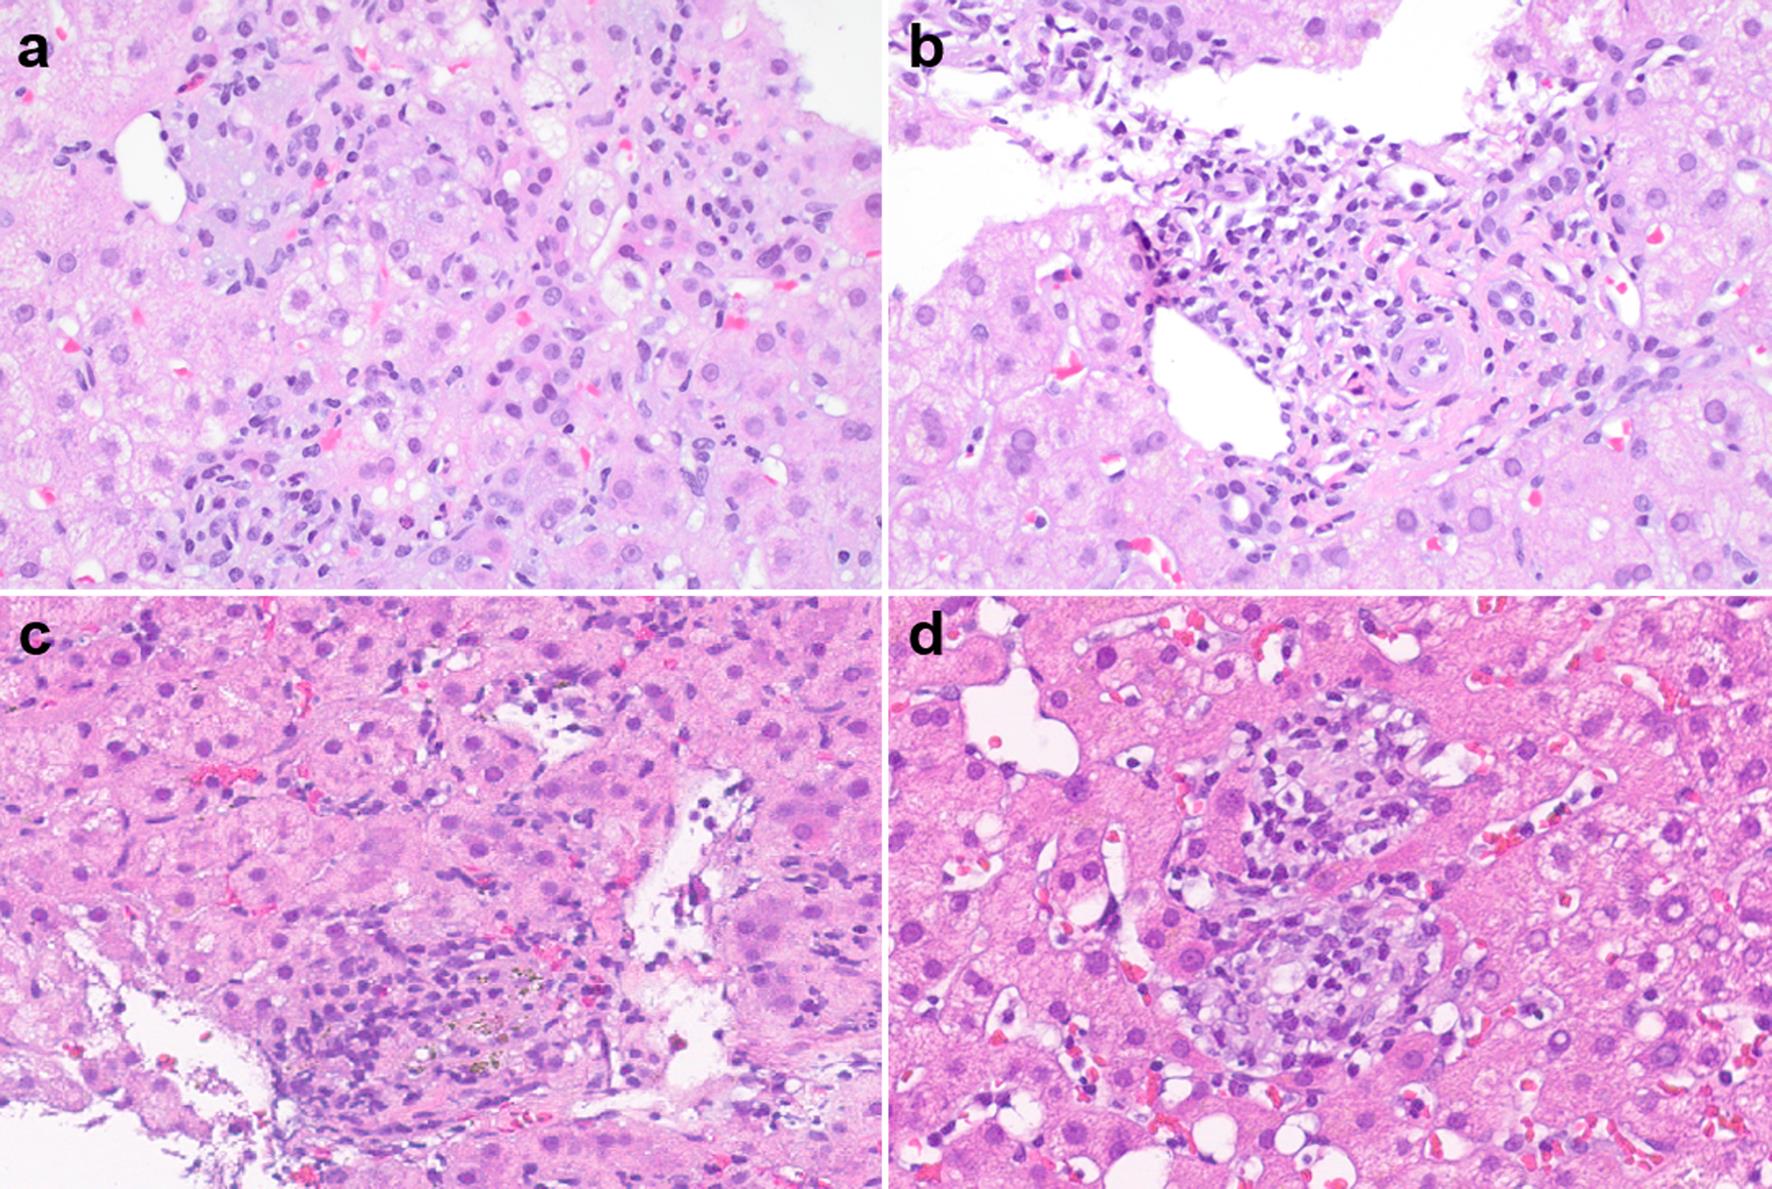 Immune checkpoint inhibitor-induced liver injury, hepatitic pattern.